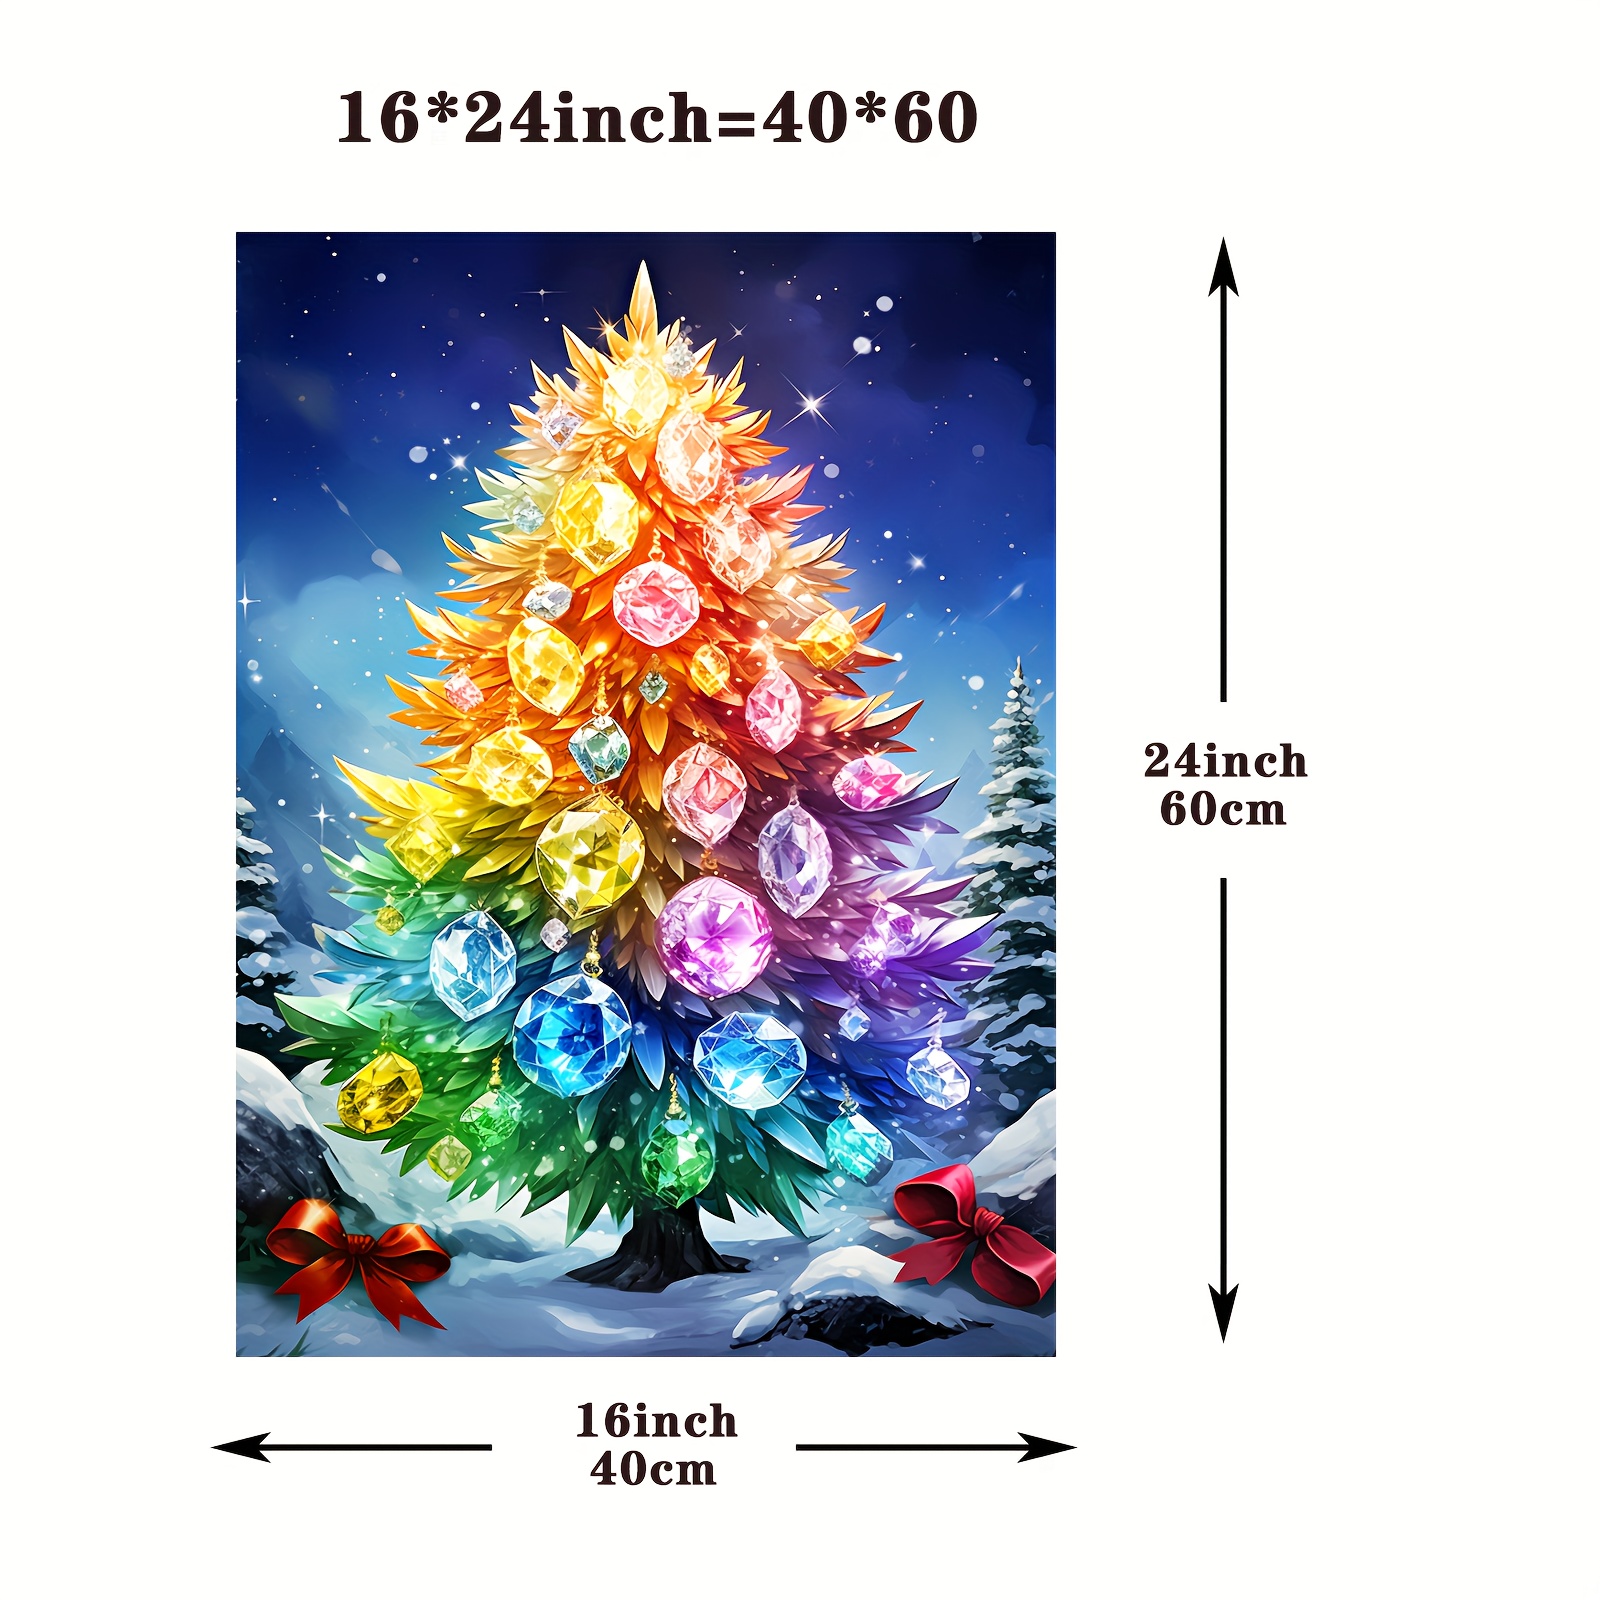 Sparkly Selections House & Christmas Tree Pre-Framed Diamond Painting Kit  with Backlighting